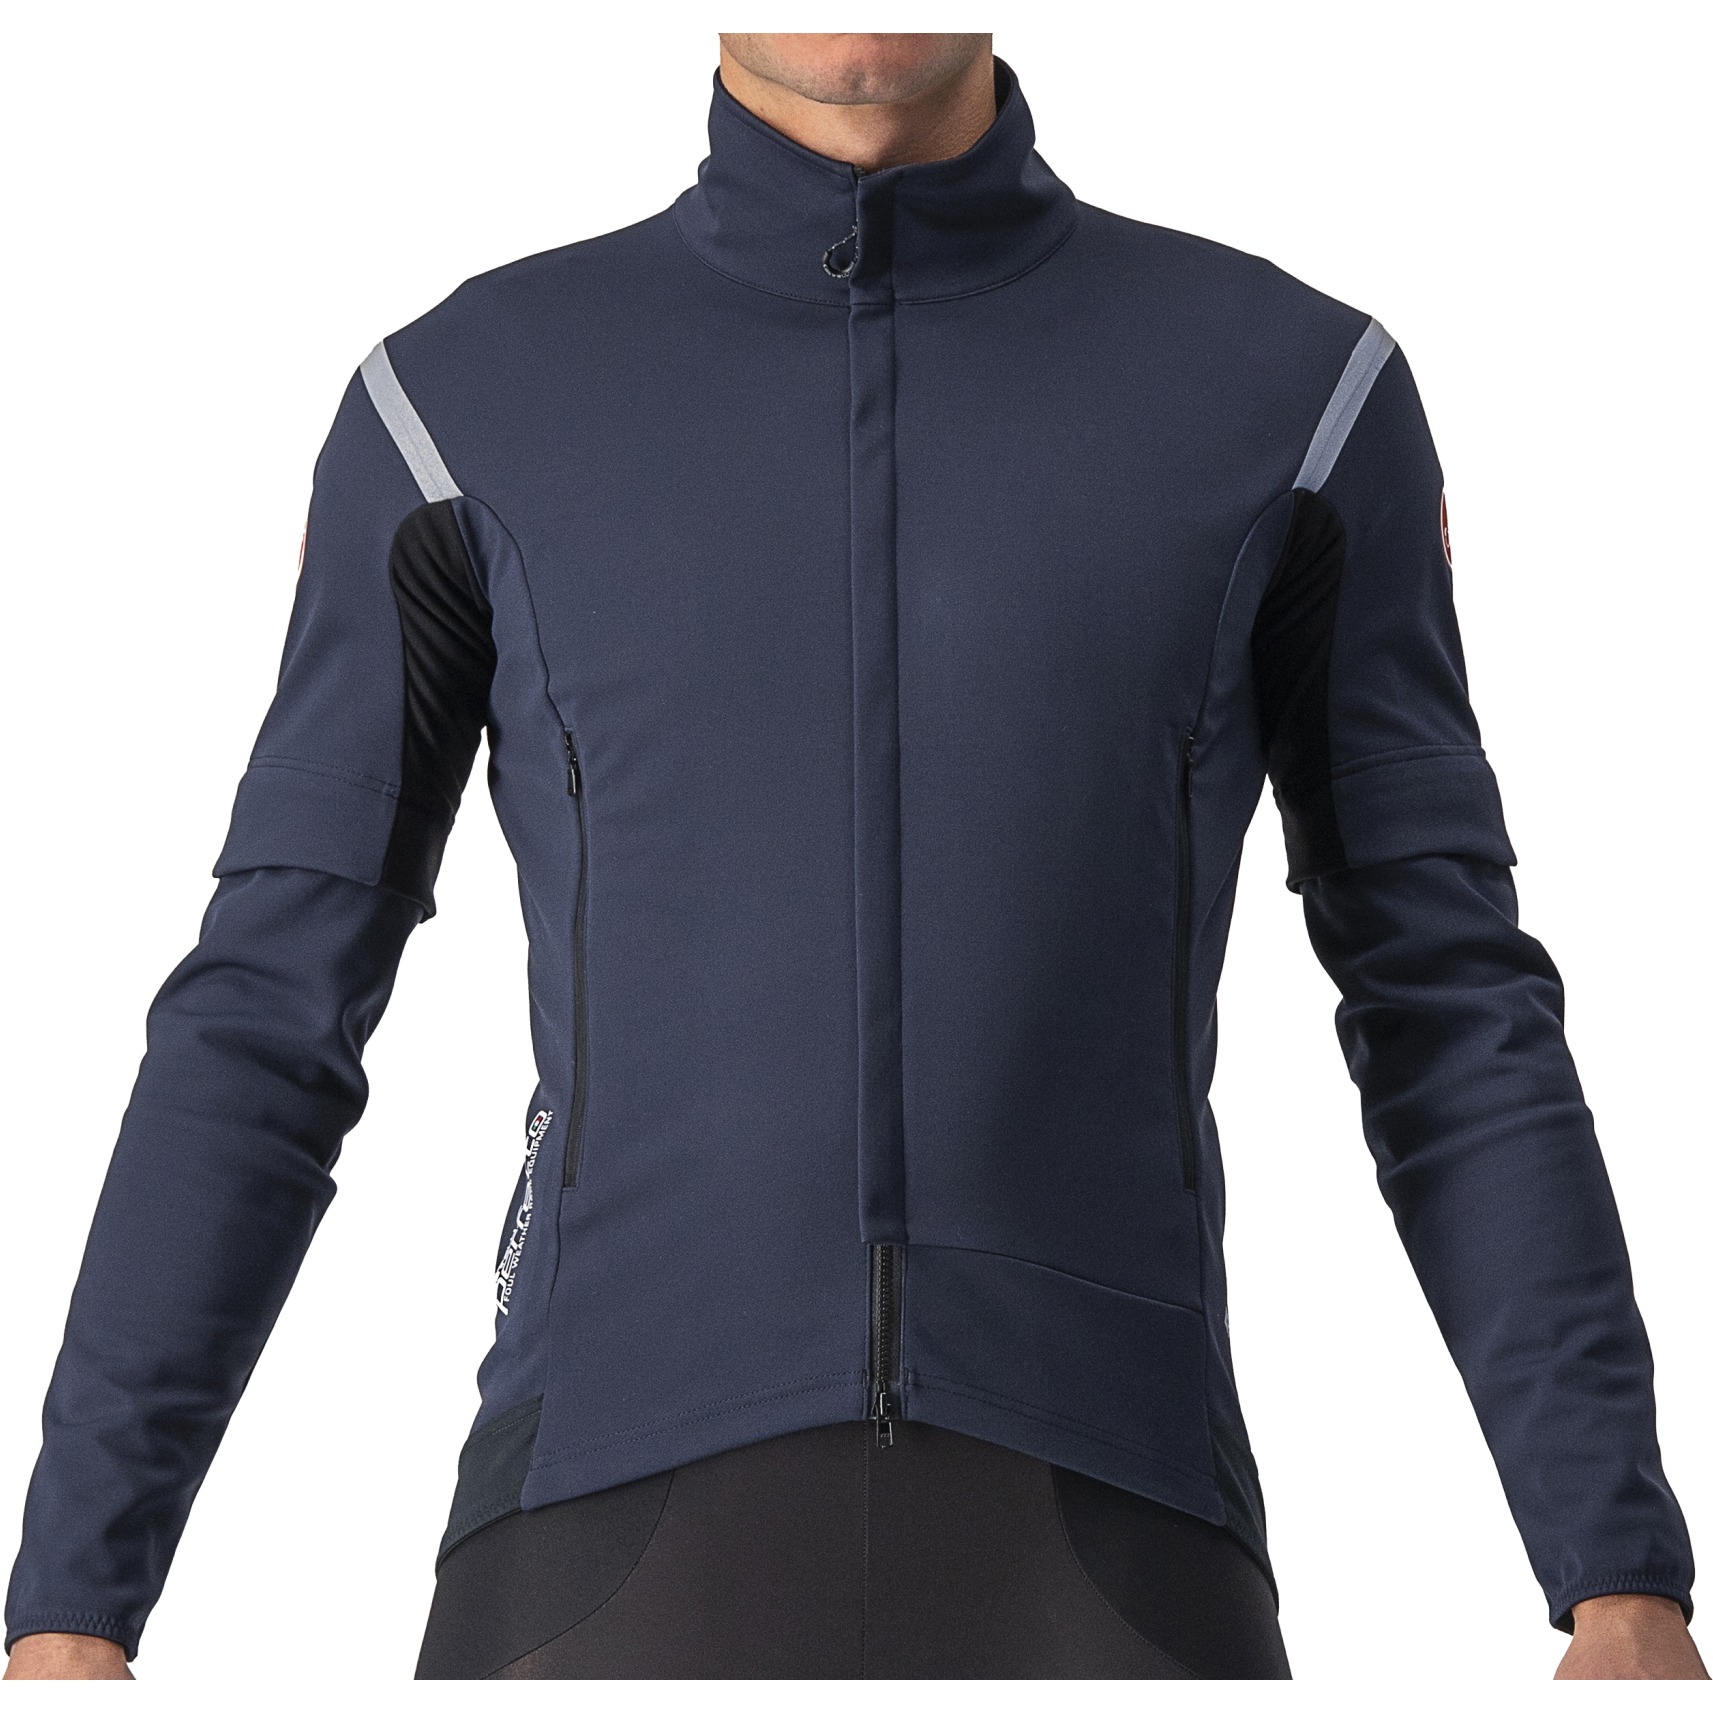 Picture of Castelli Perfetto RoS 2 Convertible Jacket Men - belgian blue/silver grey 424